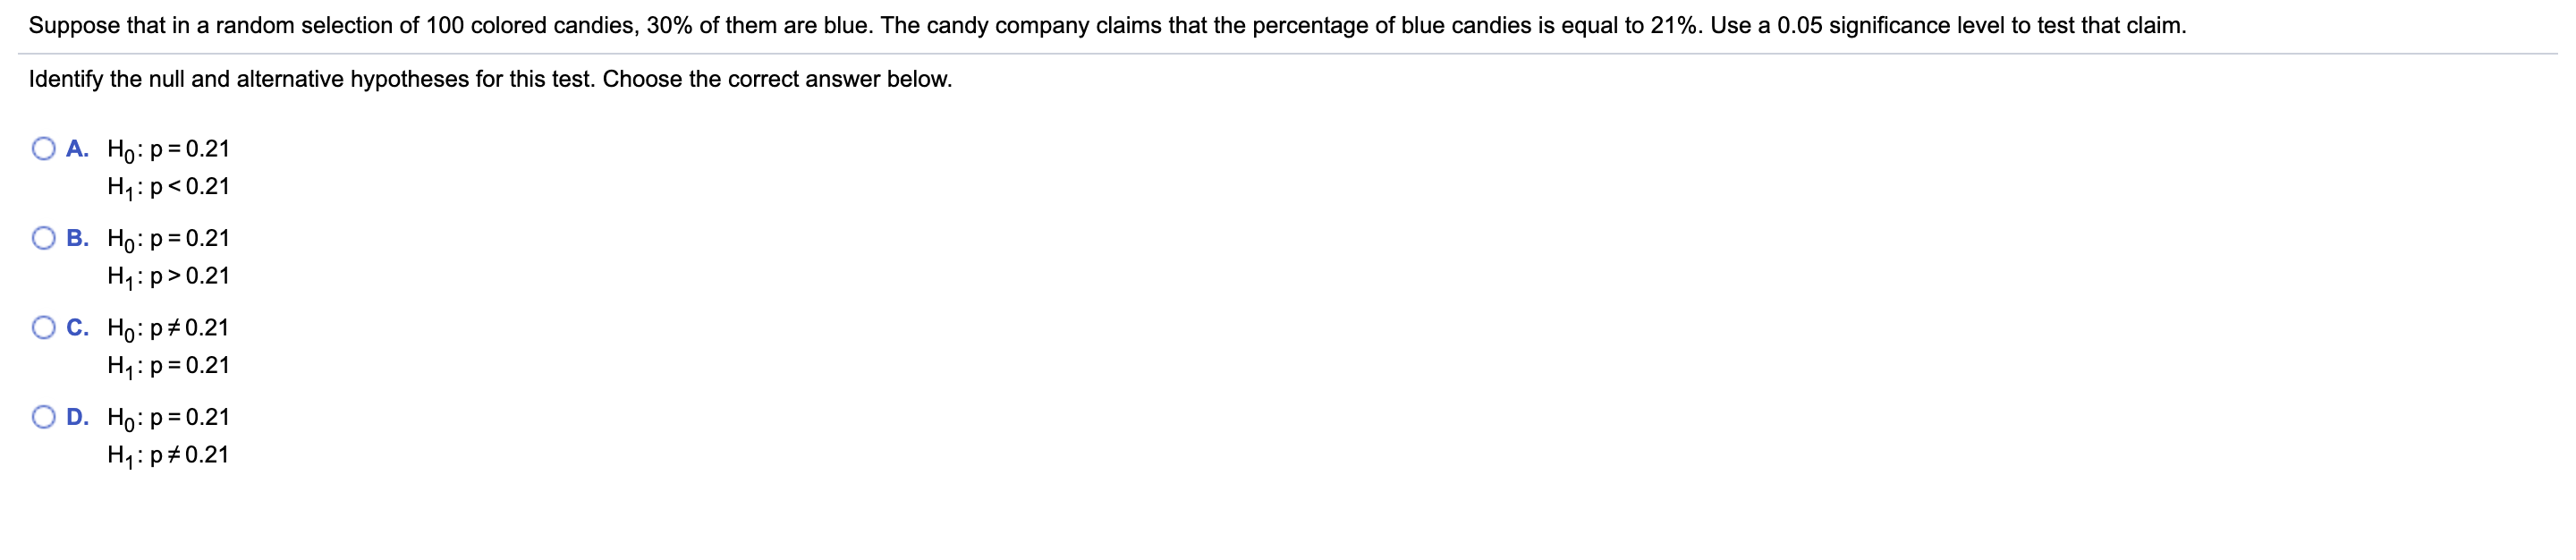 Suppose that in a random selection of 100 colored candies, 30% of them are blue. The candy company claims that the percentage of blue candies is equal to 21%. Use a 0.05 significance level to test that claim.
Identify the null and alternative hypotheses for this test. Choose the correct answer below.
А. Но: р30.21
H1:p<0.21
В. Но: Р3D0.21
H4:p>0.21
С. Но: р#0.21
H1:p= 0.21
D. Ho: p= 0.21
H1:p#0.21
